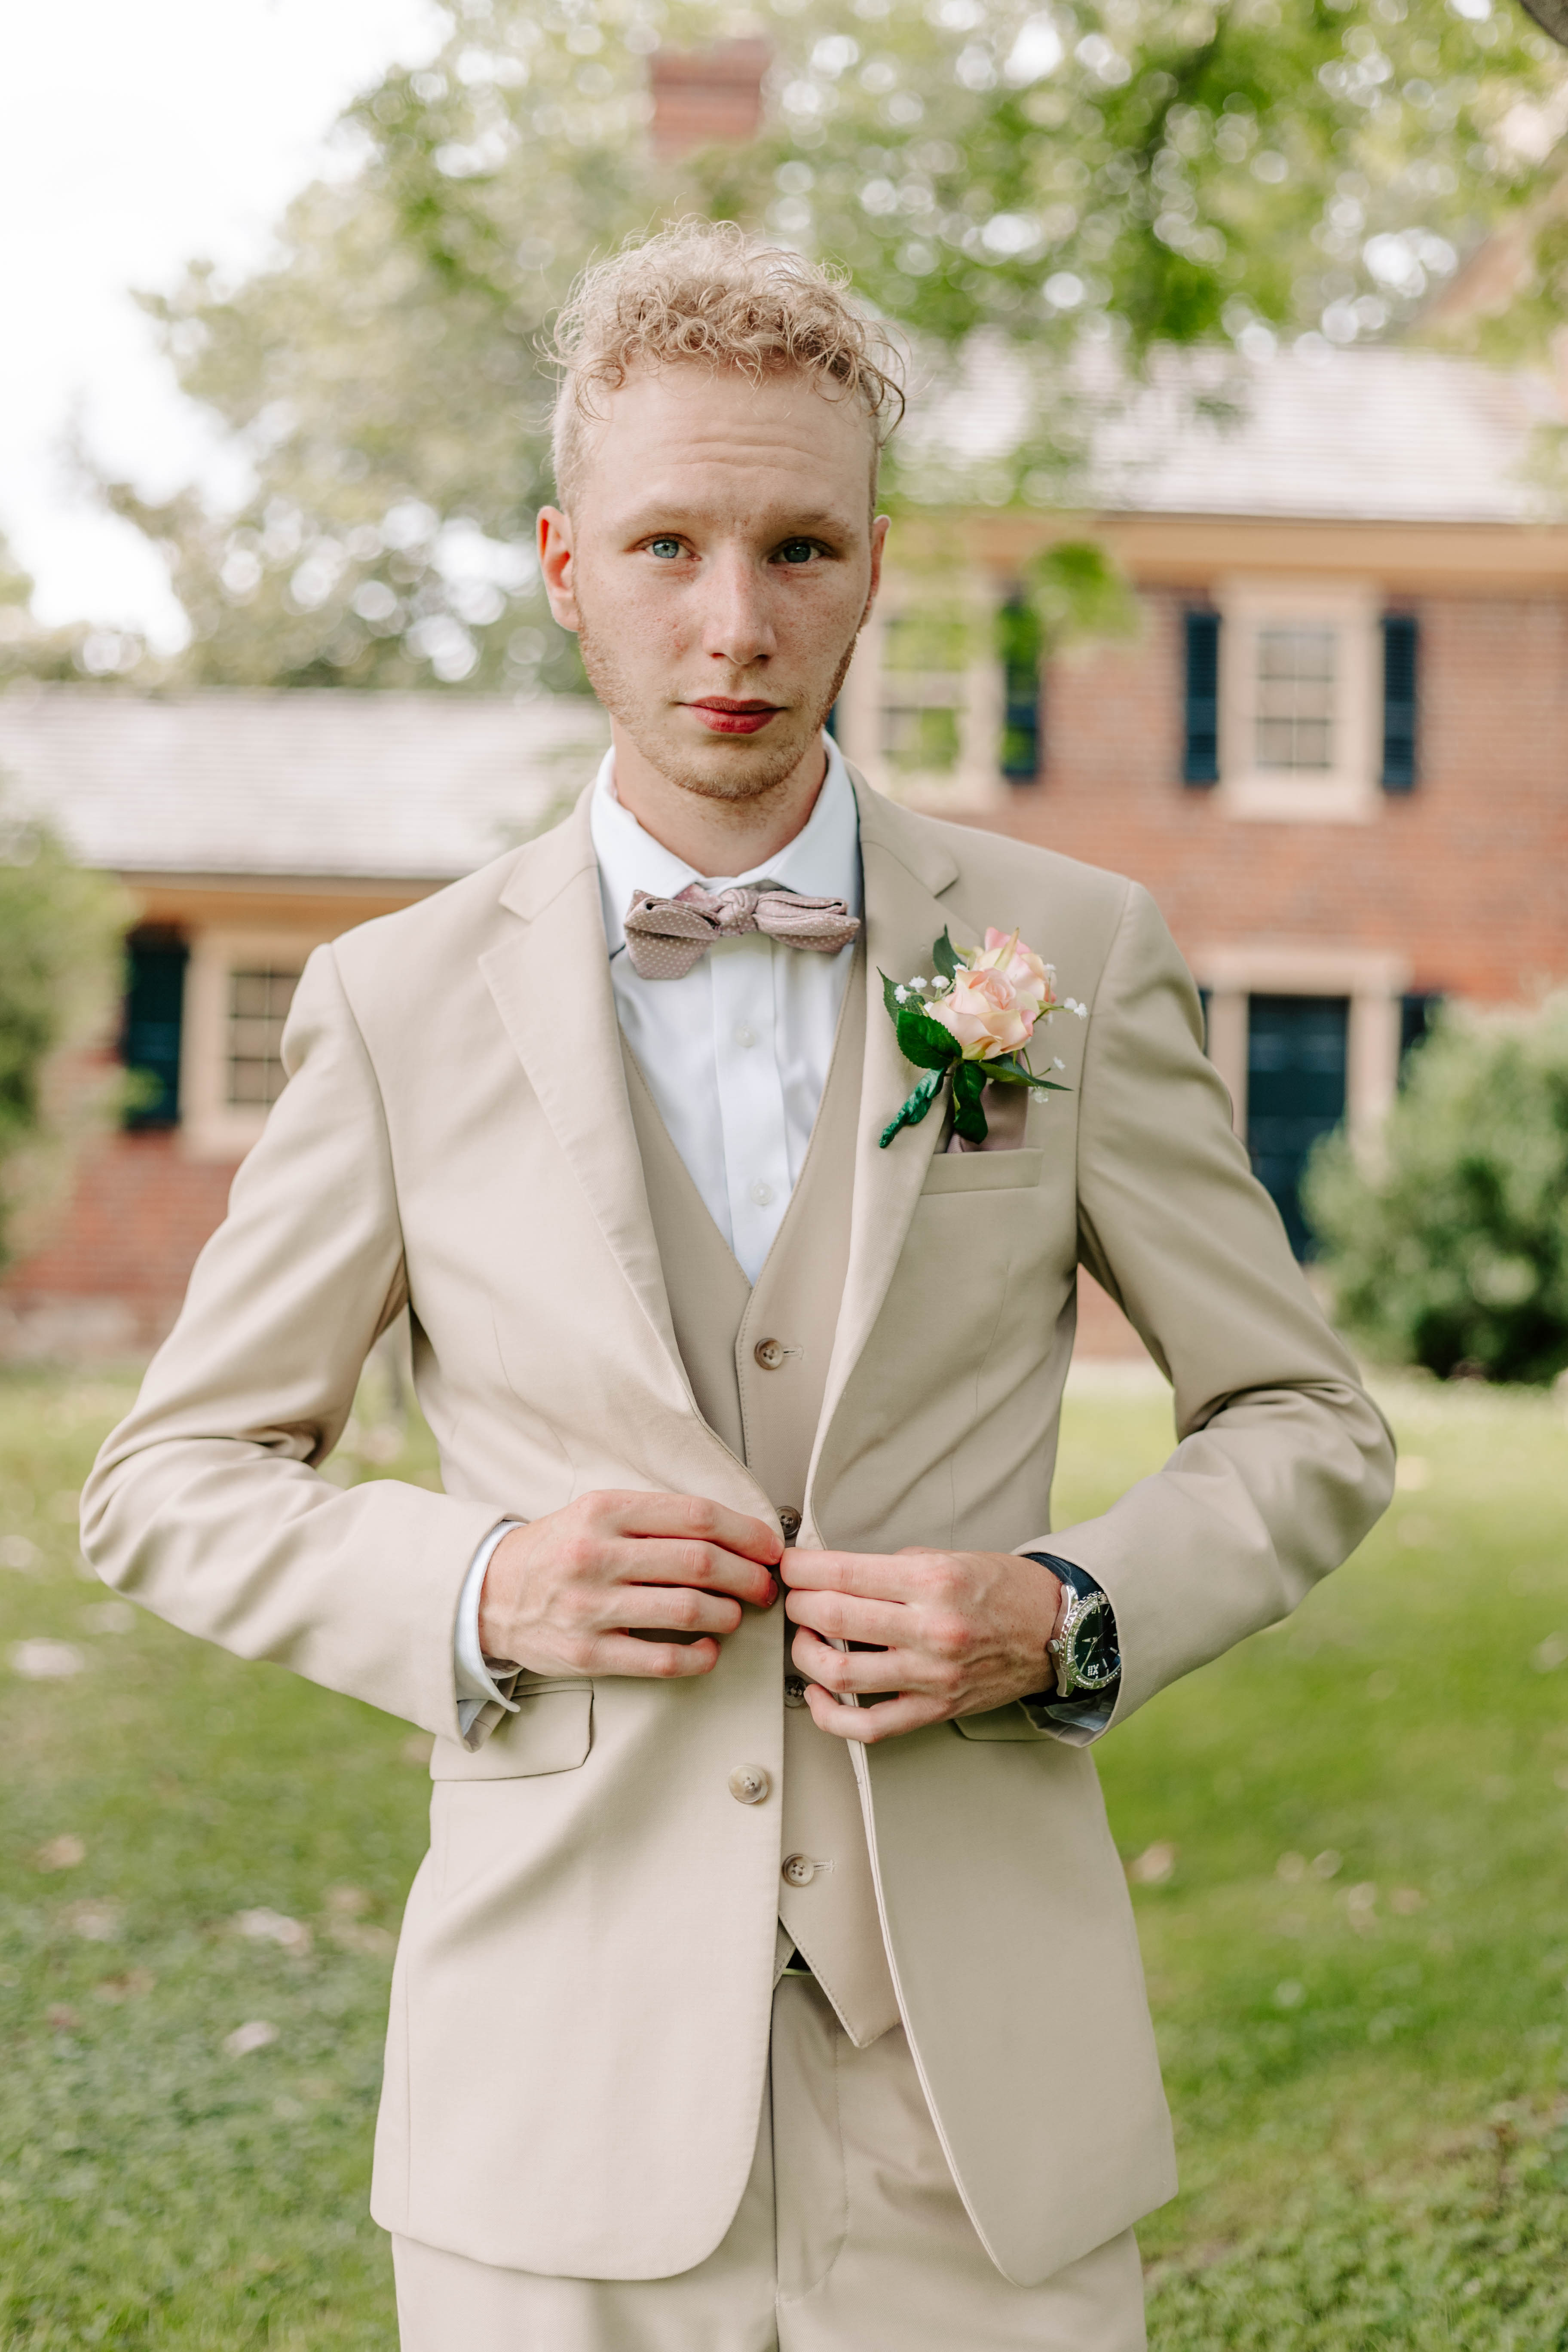 Groom butting tux for getting ready photos at Delaware spring wedding  at Historic Odessa. Delaware modern wedding photographer Alli McGrath photographed this candid moment.